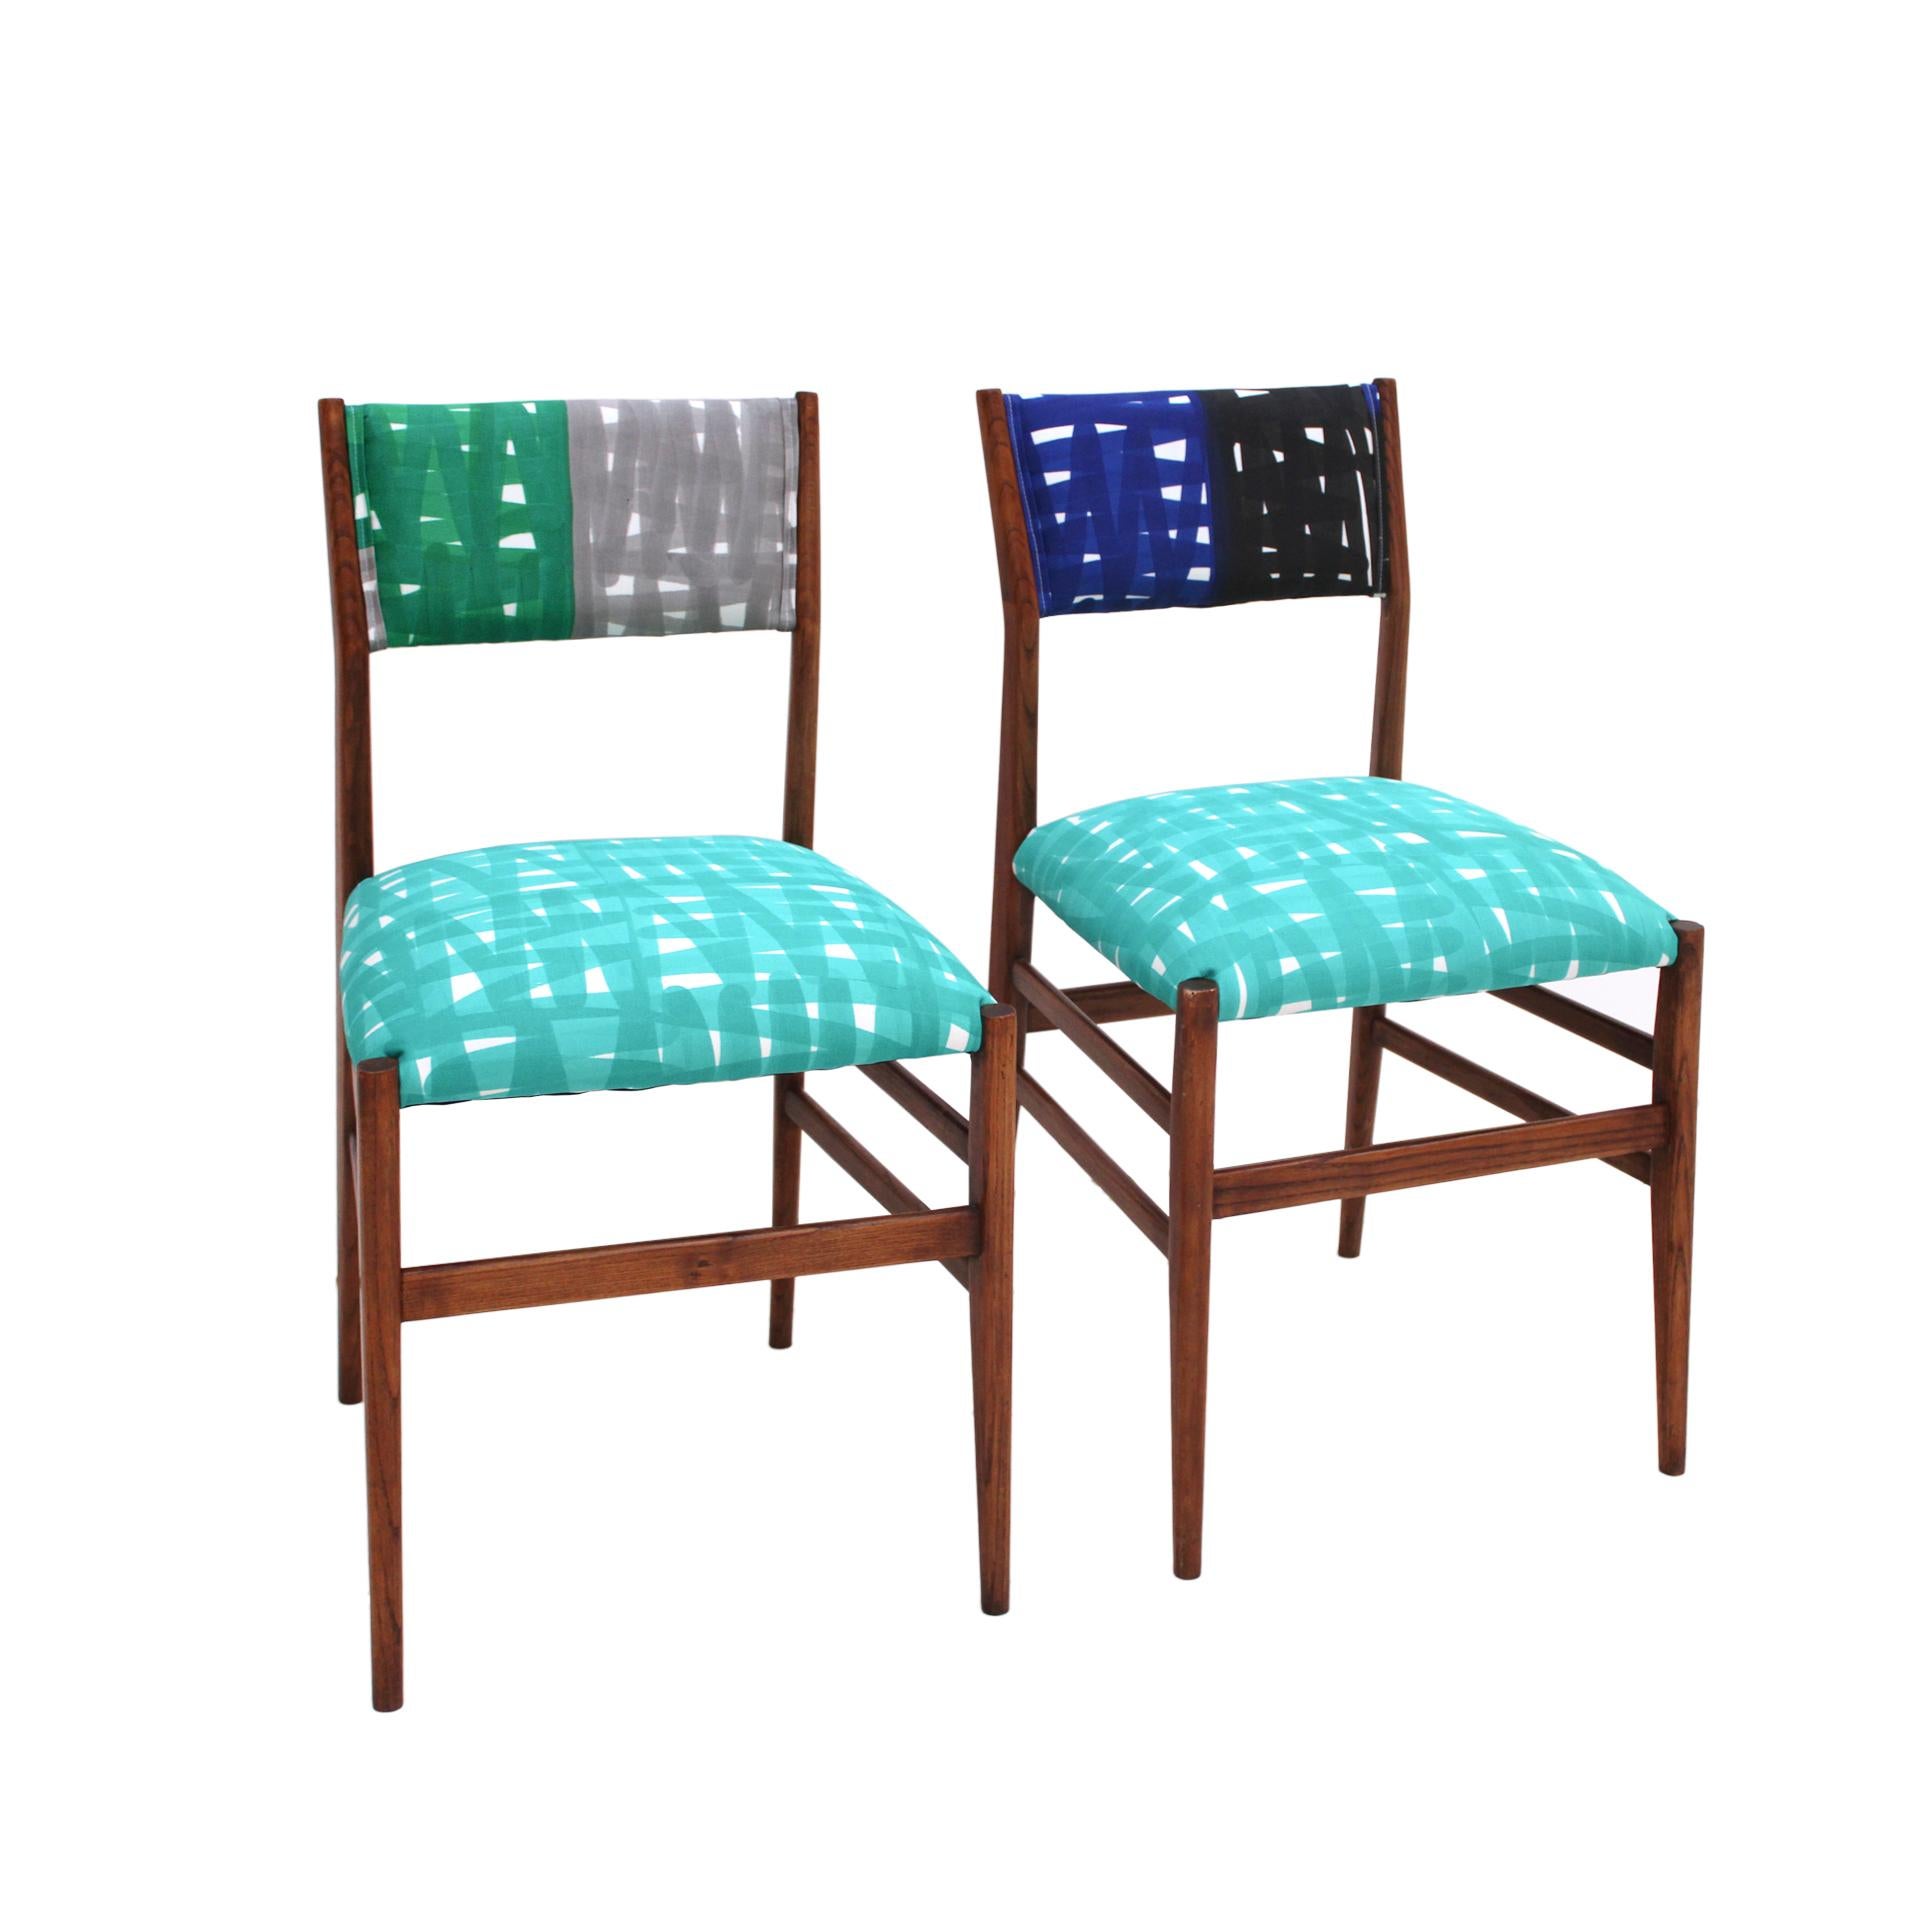 Set of two chairs model 